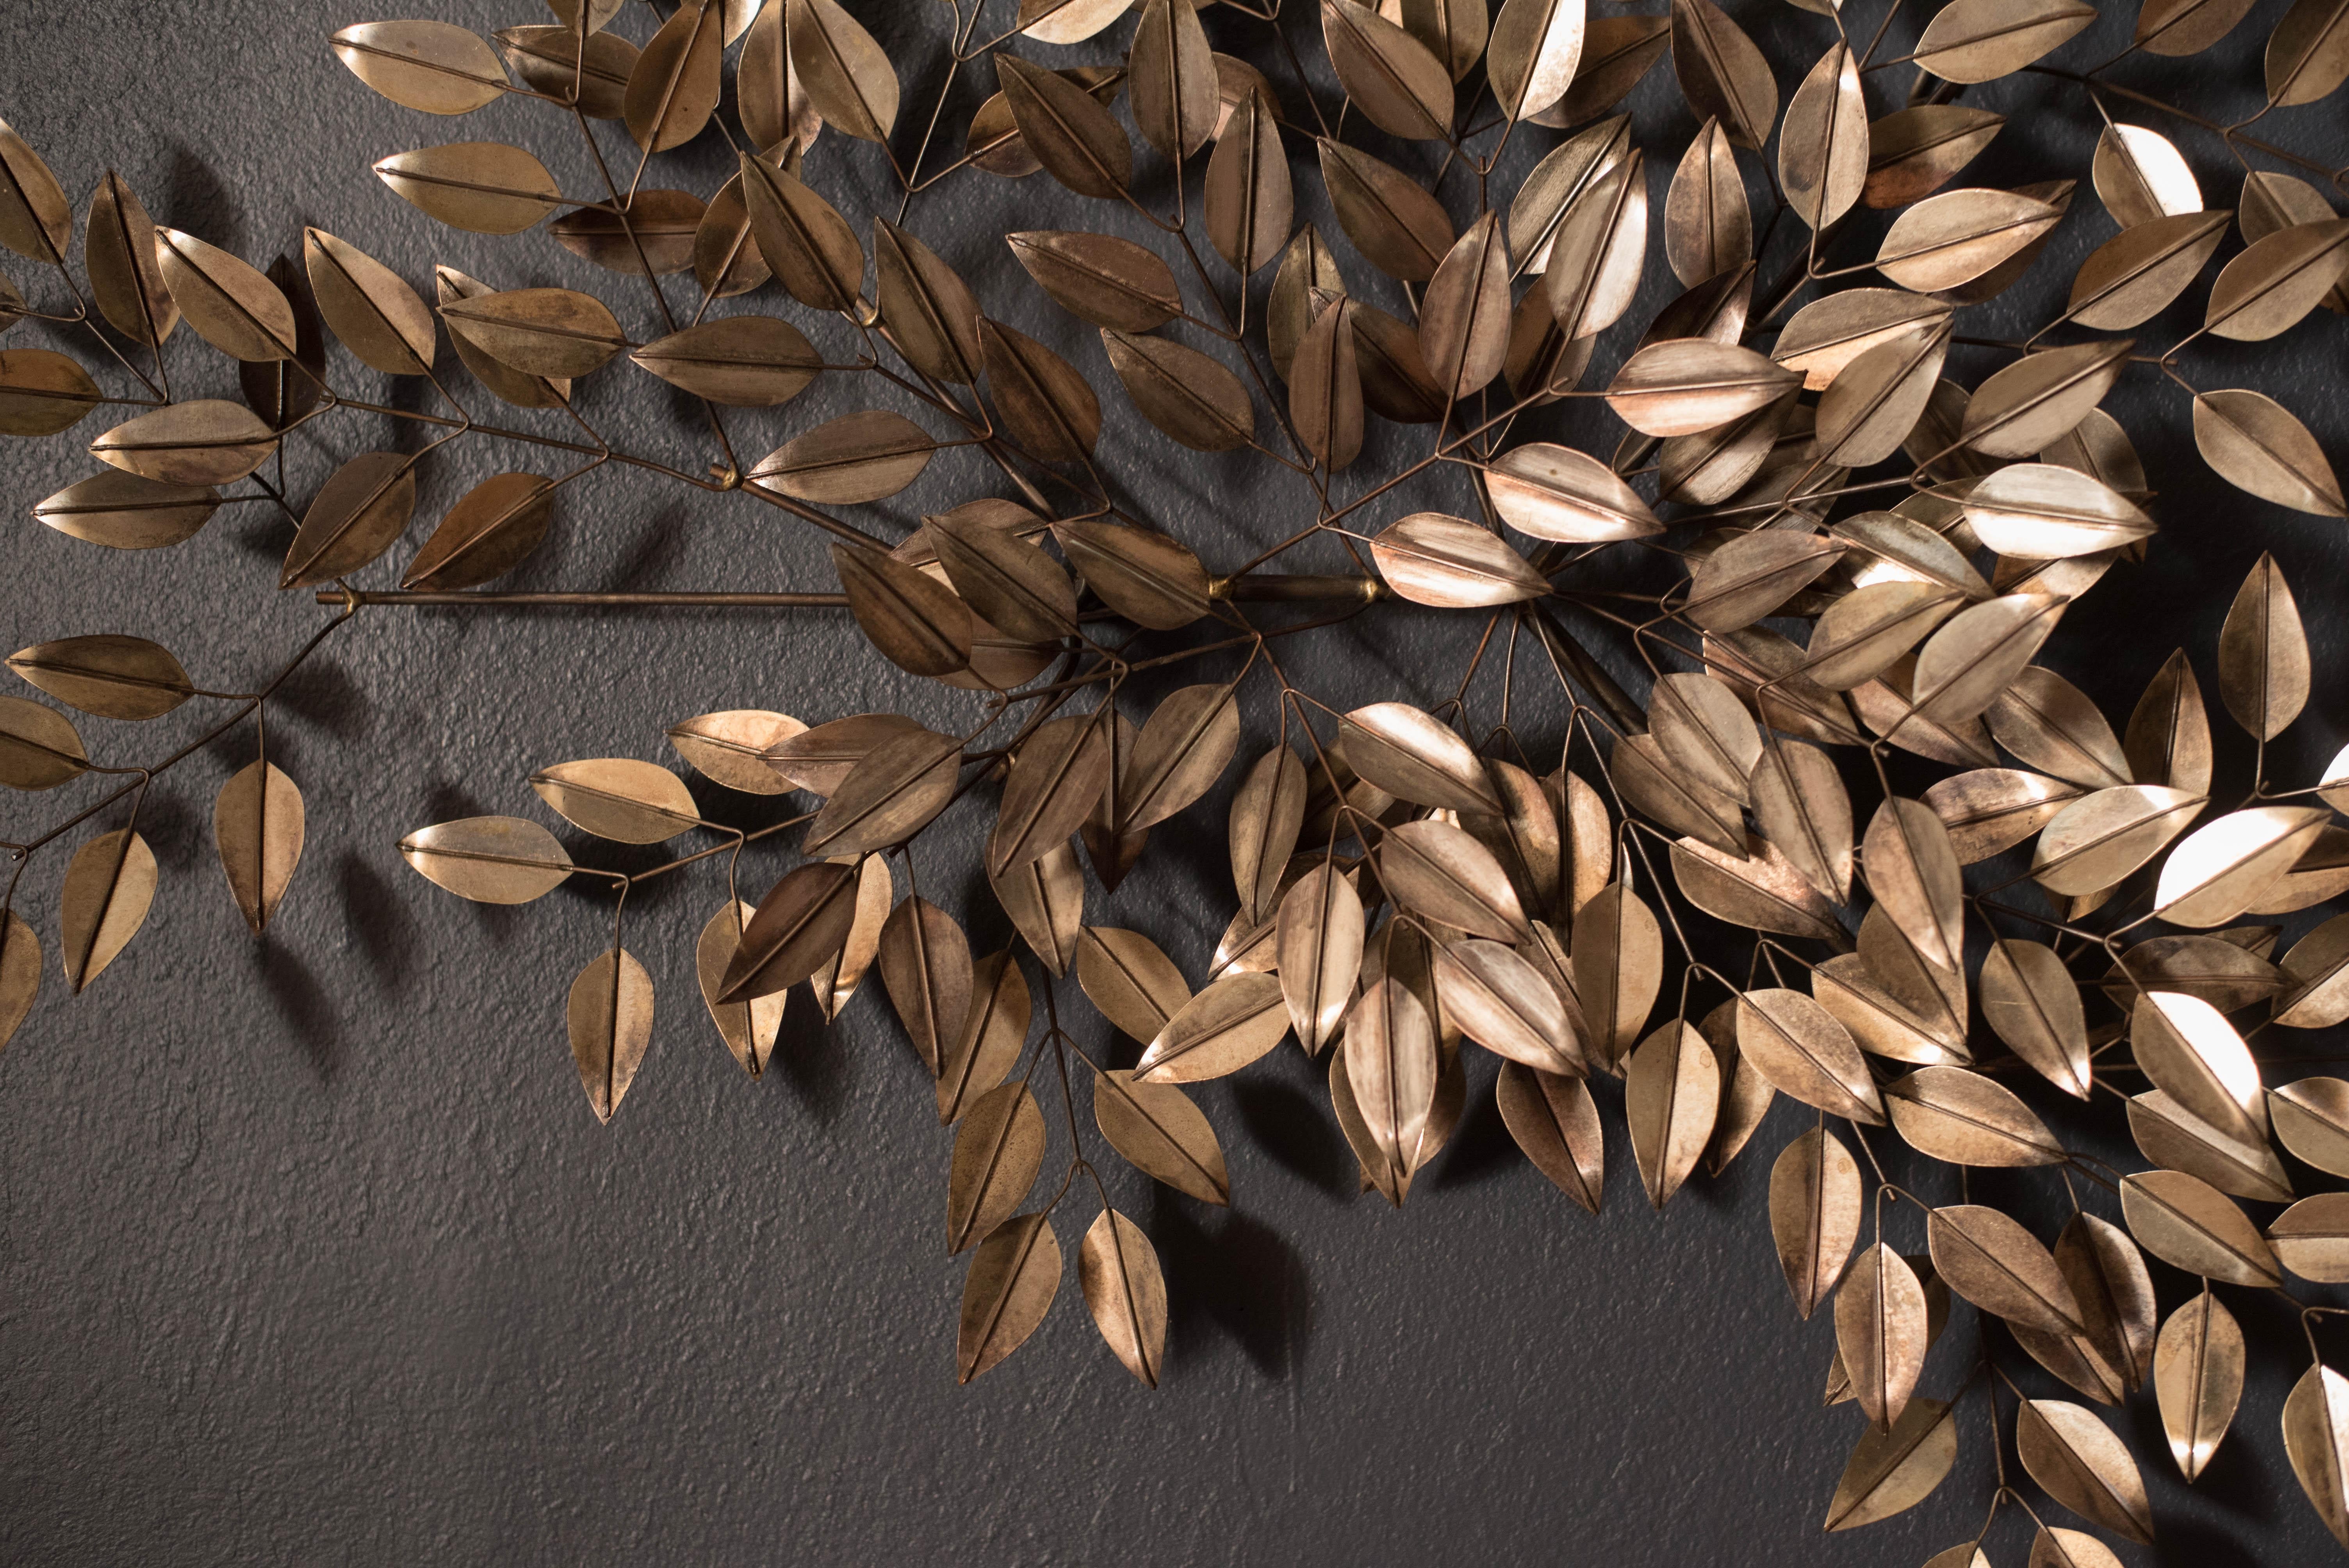 Late 20th Century Mid-Century Metal Leaves Wall Art Sculpture by Curtis Jere for Artisan House